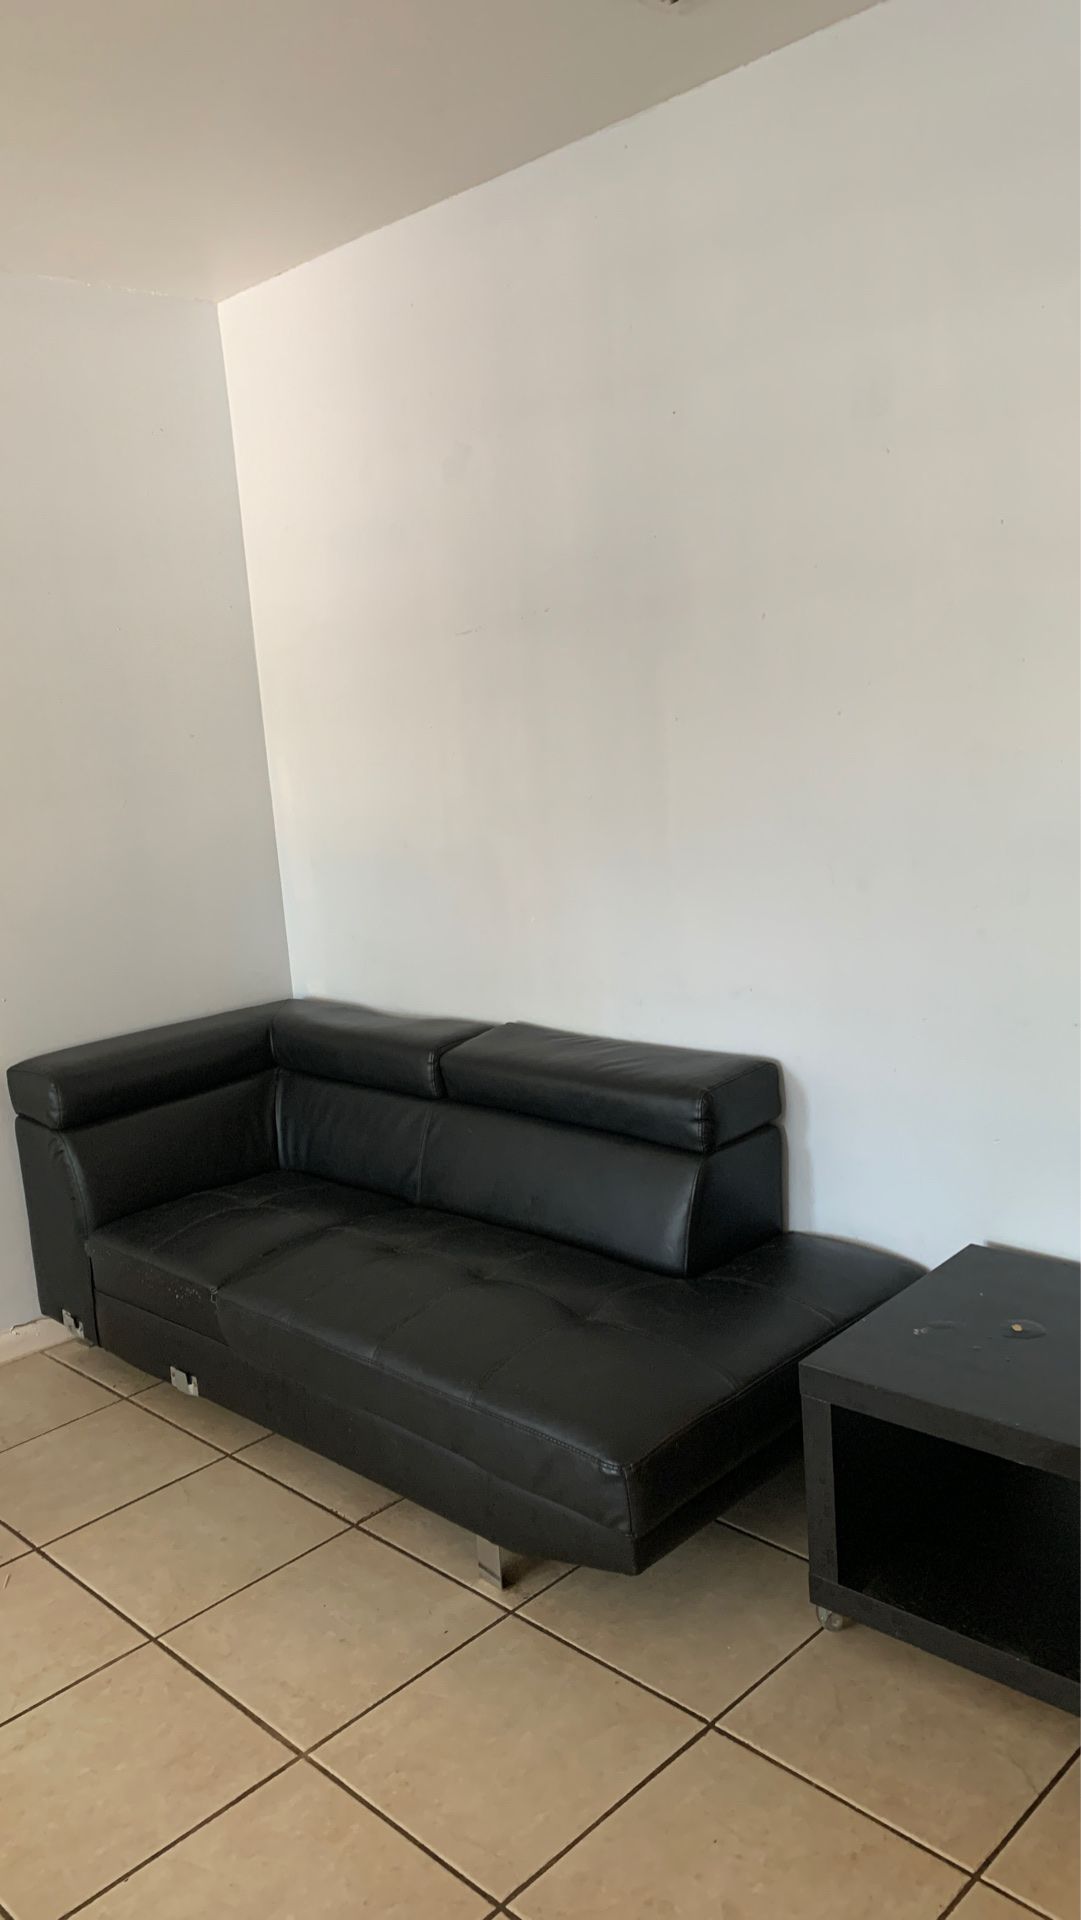 Free couch and side table